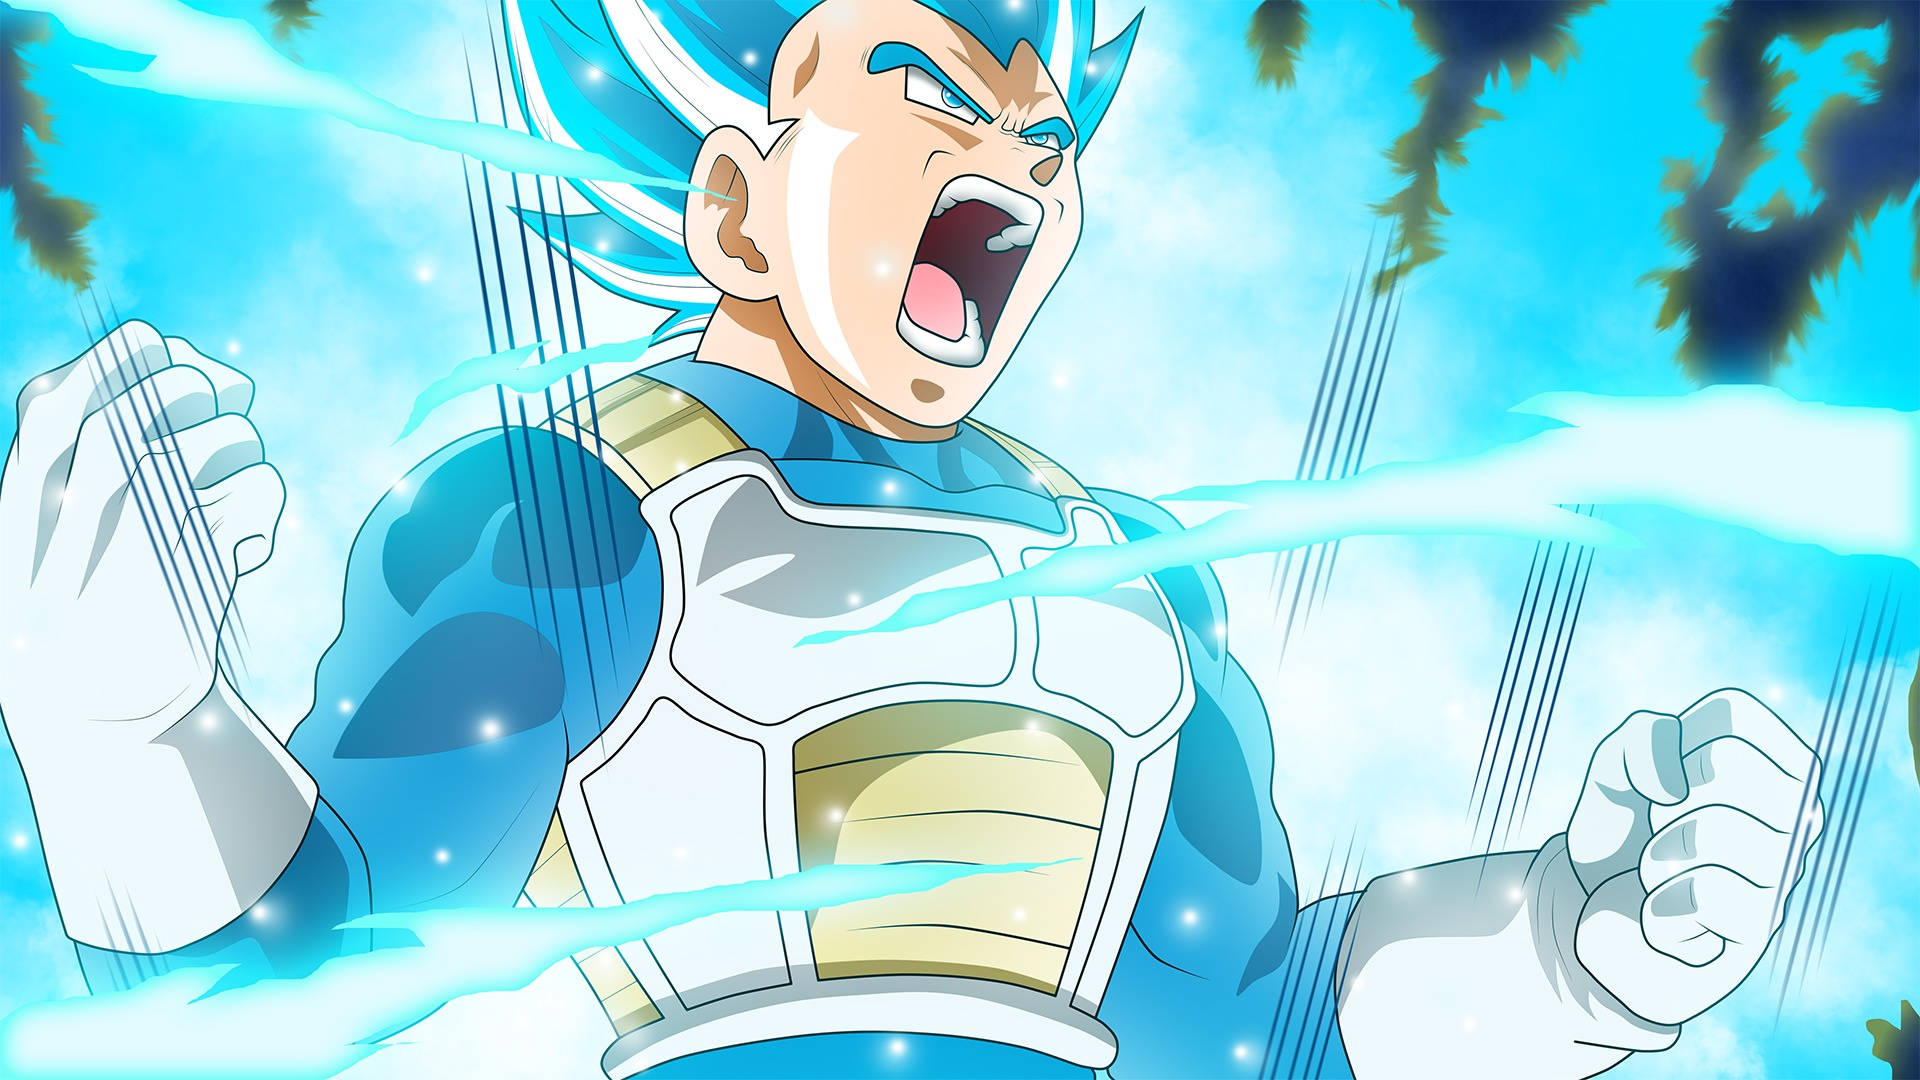 Vegeta 1920X1080 Wallpaper and Background Image